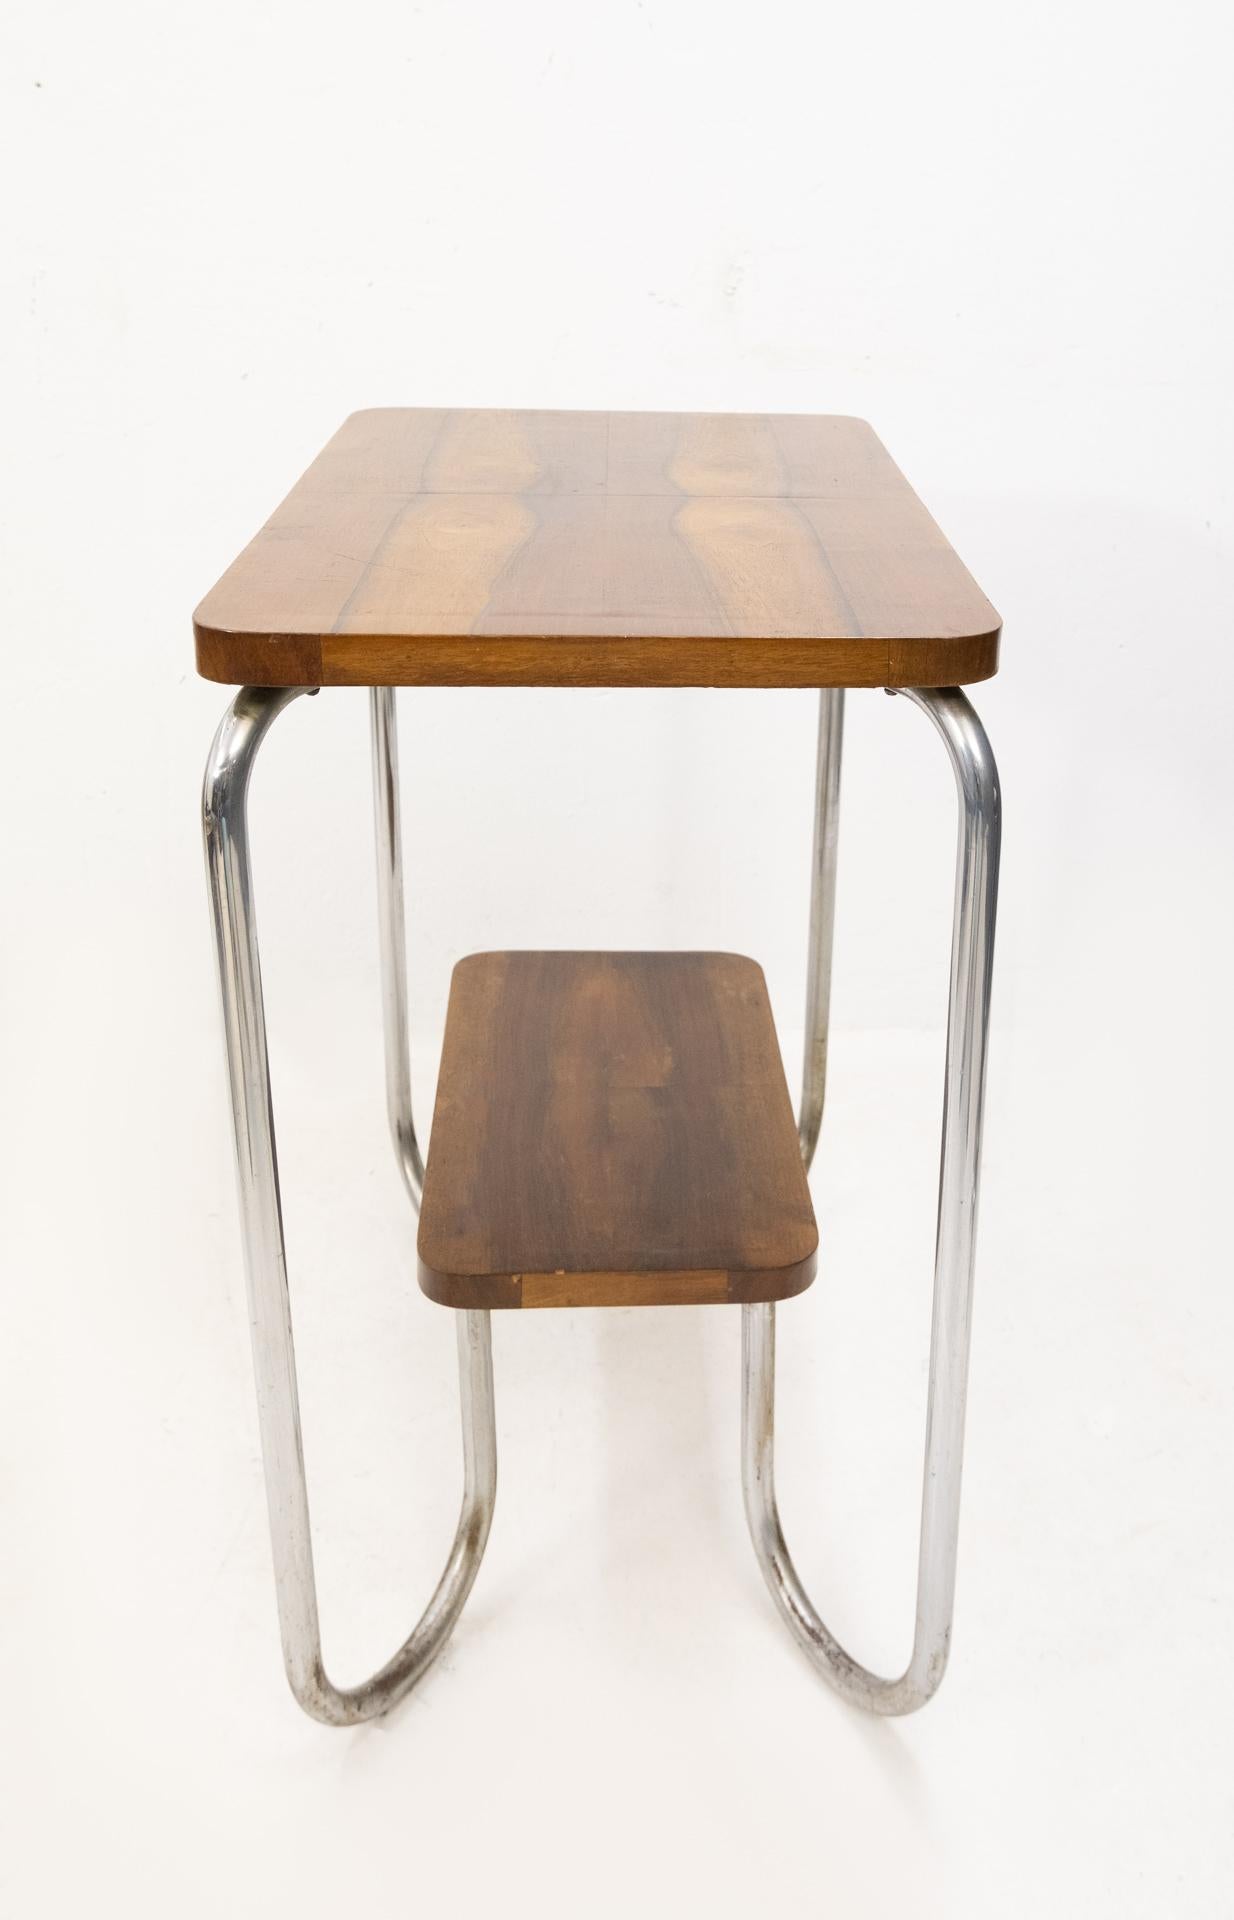 Mid-20th Century Art Deco Side Table Attributed to Gispen Holland For Sale